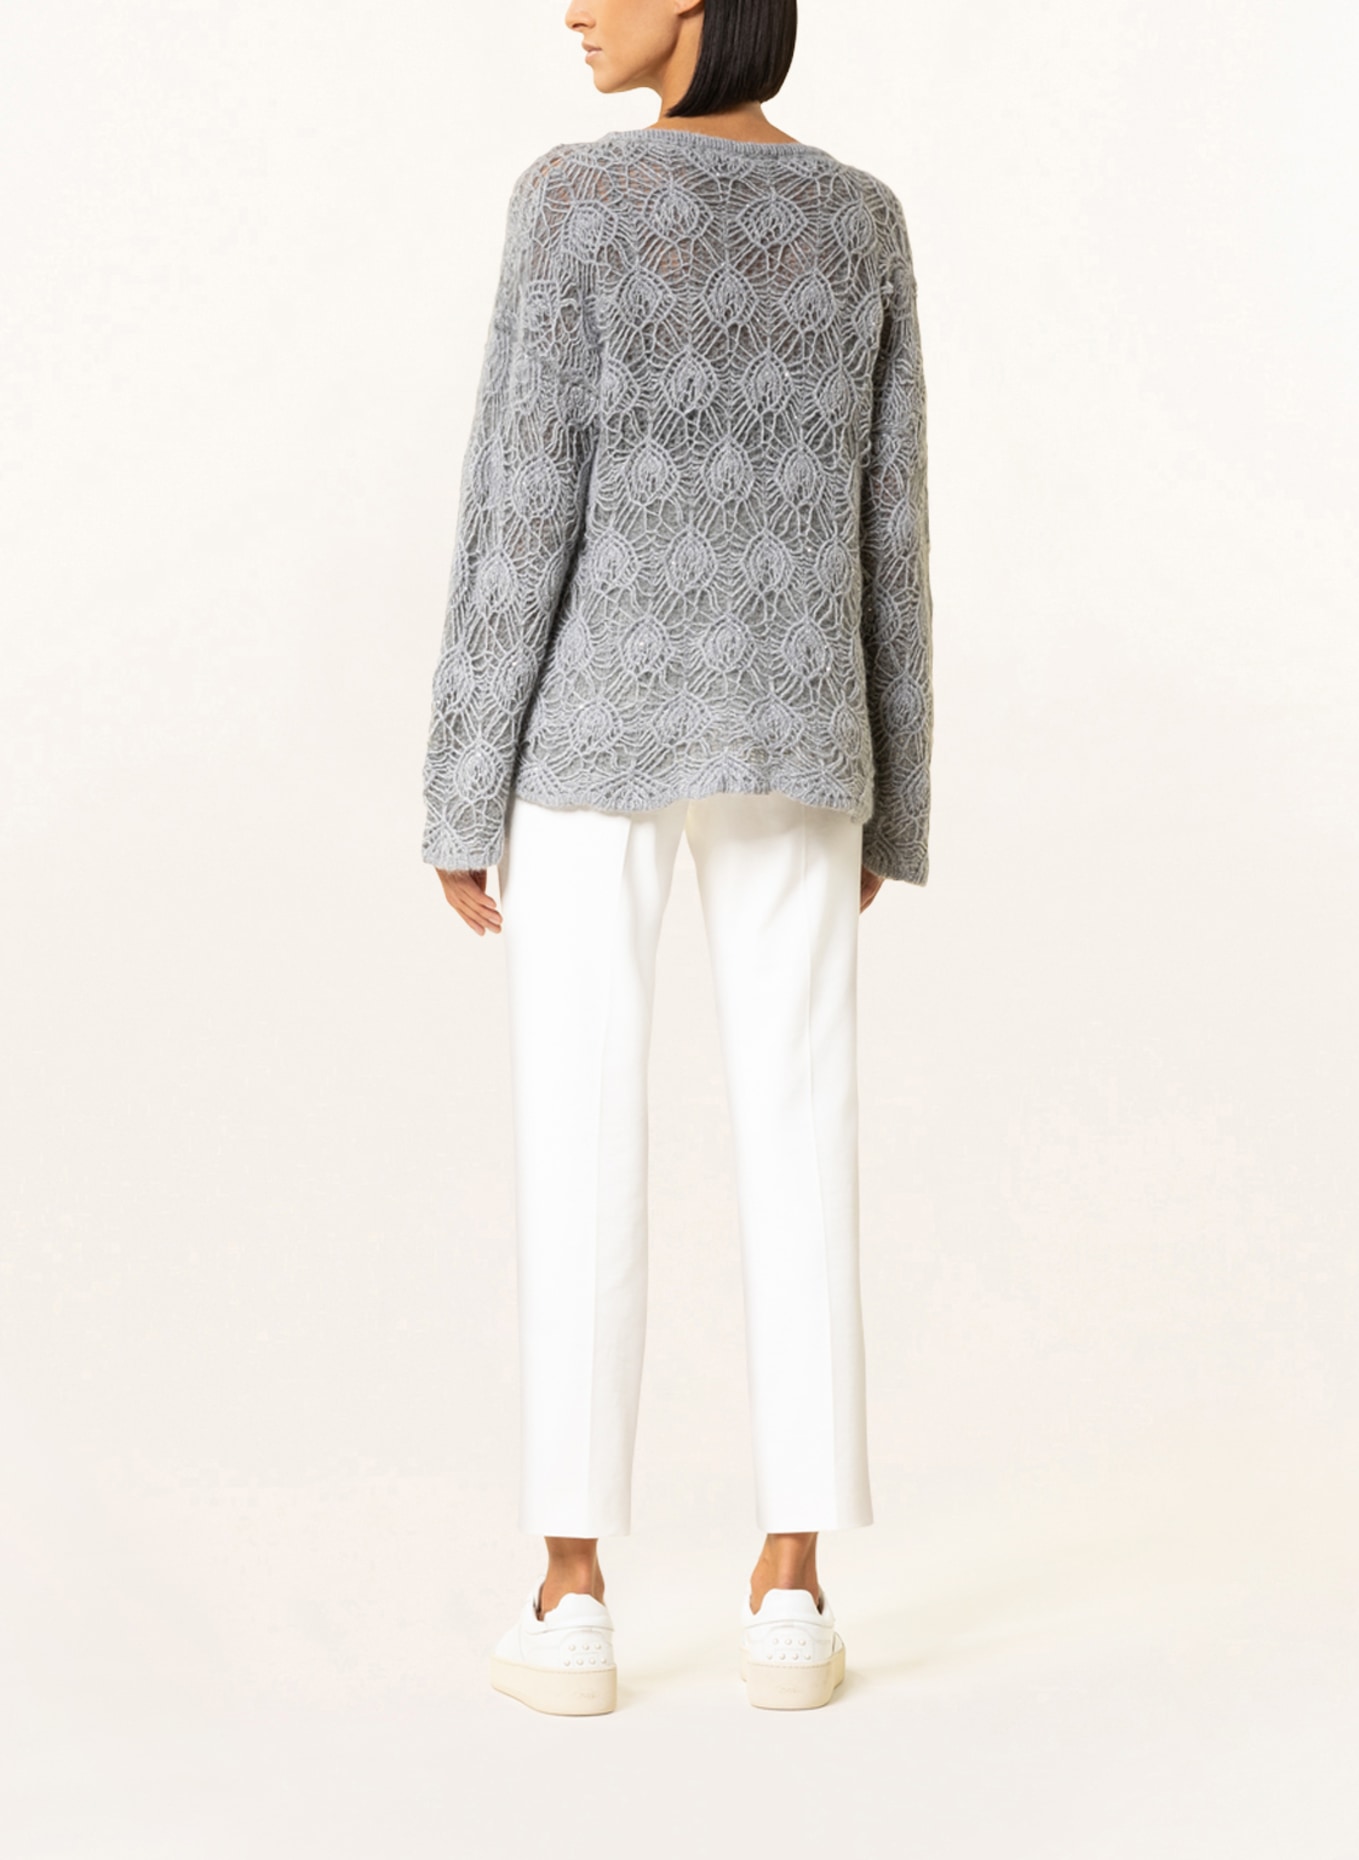 FABIANA FILIPPI Sweater with sequins, Color: GRAY (Image 3)